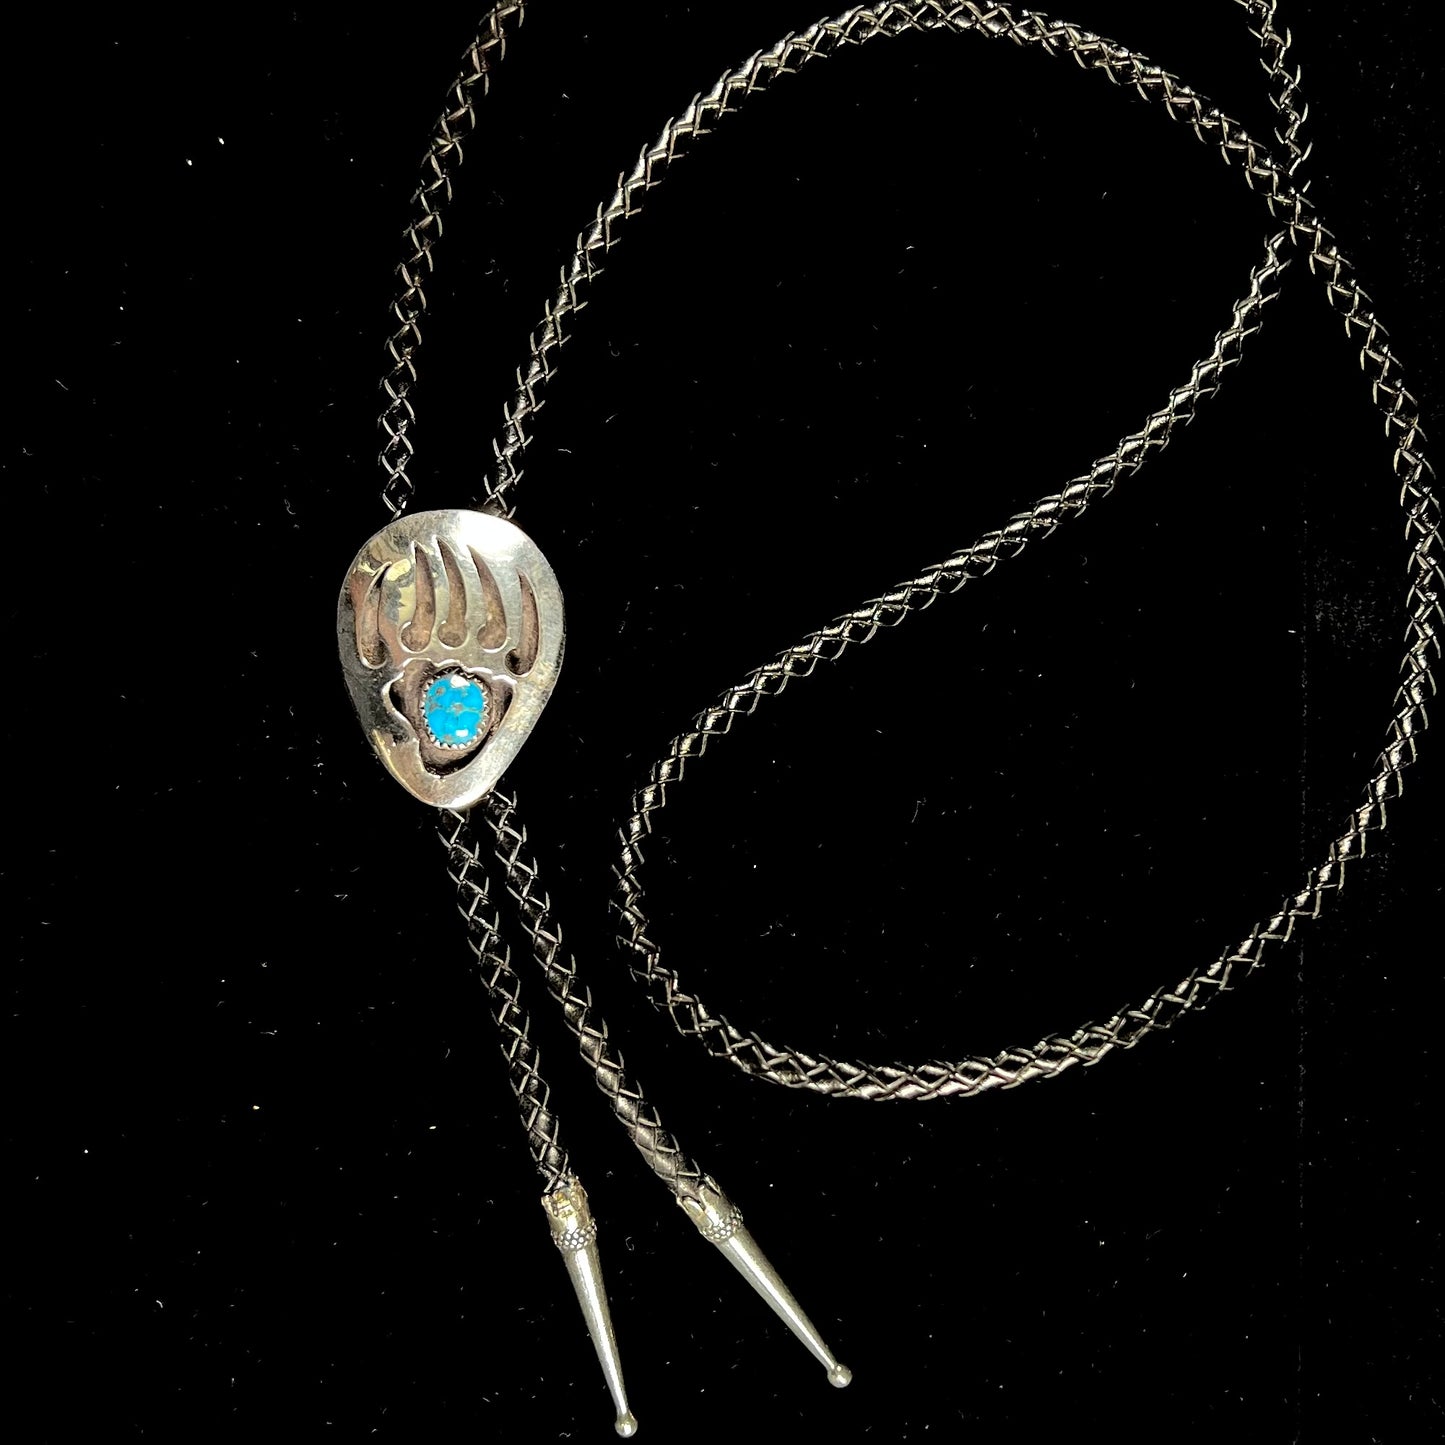 A sterling silver bolo tie in the shape of a bear's paw set with a Morenci turquoise stone.